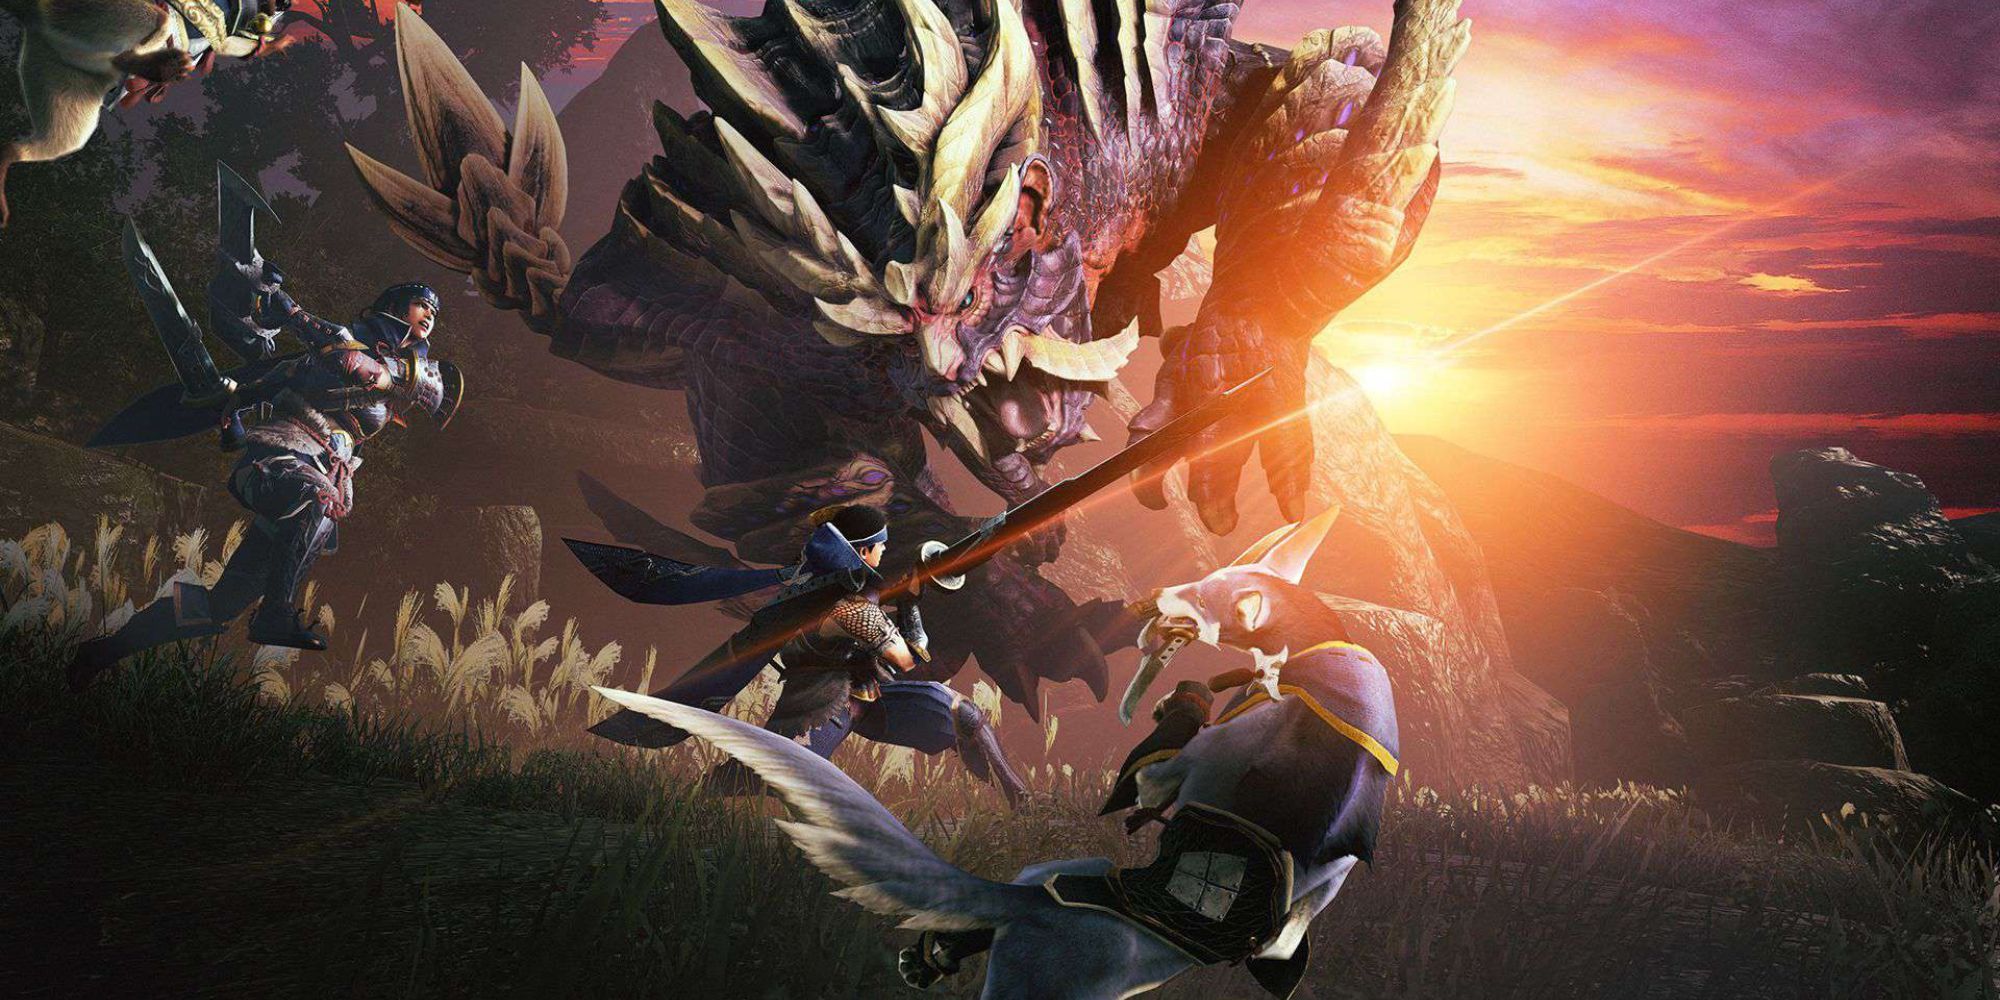 Monster Hunter Rise characters fighting a giant scaly monster